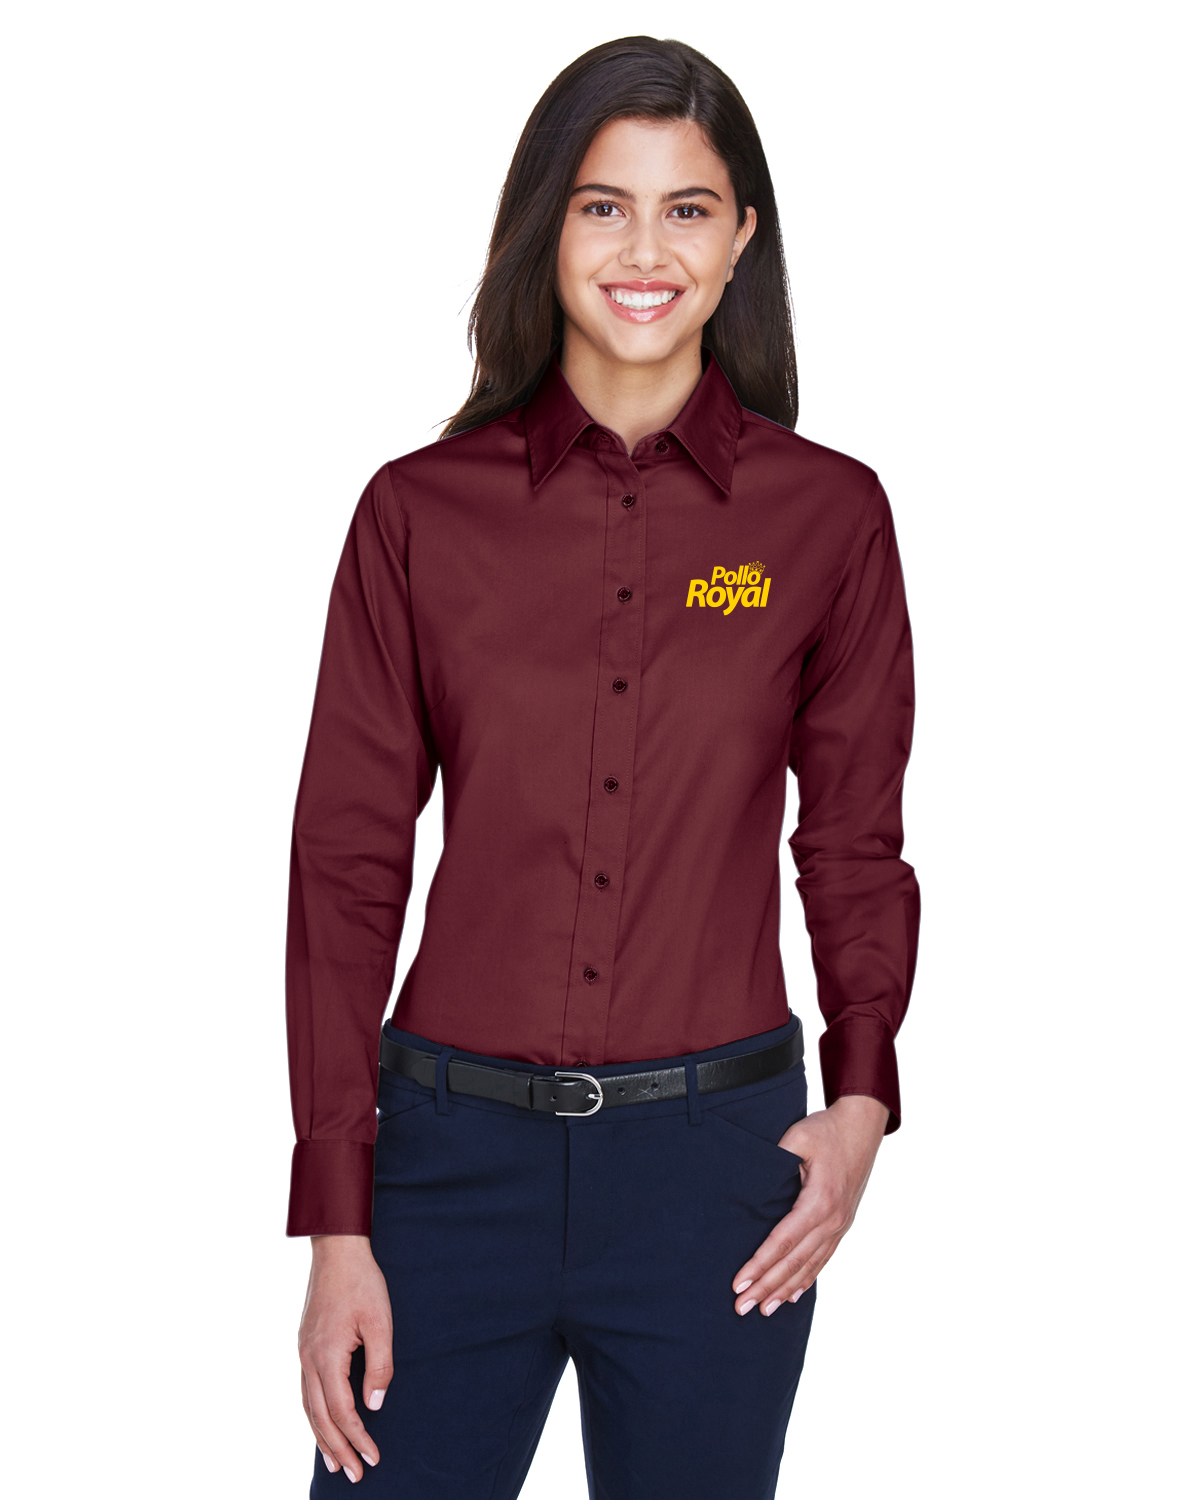 M500W Pollo Royal Ladies\' Easy Blend™ Long-Sleeve Twill Shirt with Stain-Release